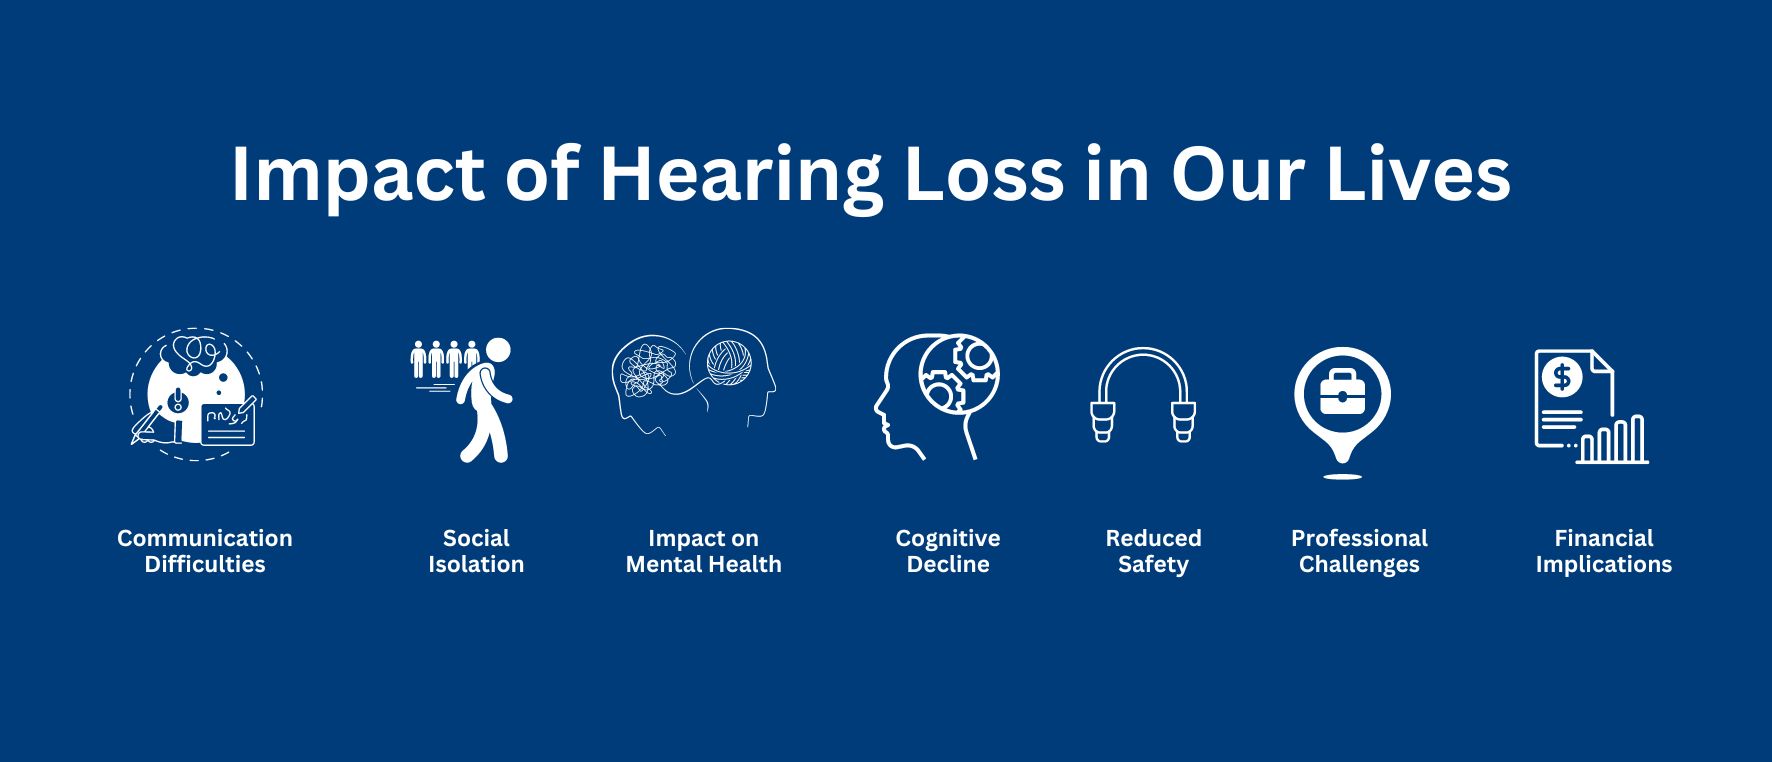 How Do We Make Our Ear Health a Top Priority? | Aanvii Hearing